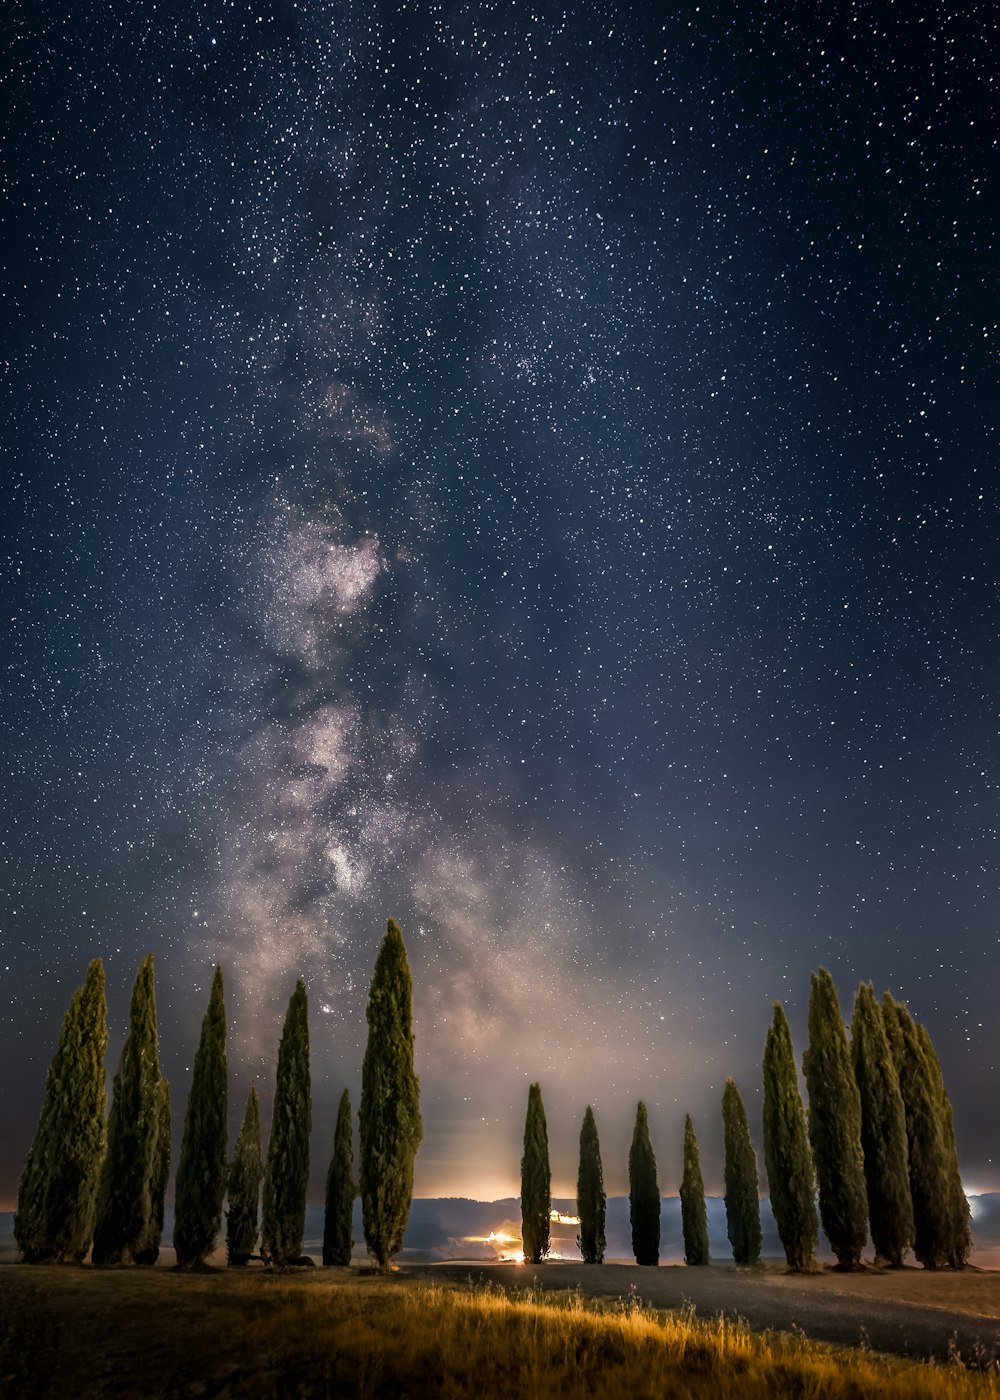 a group of trees with the milky way in the sky